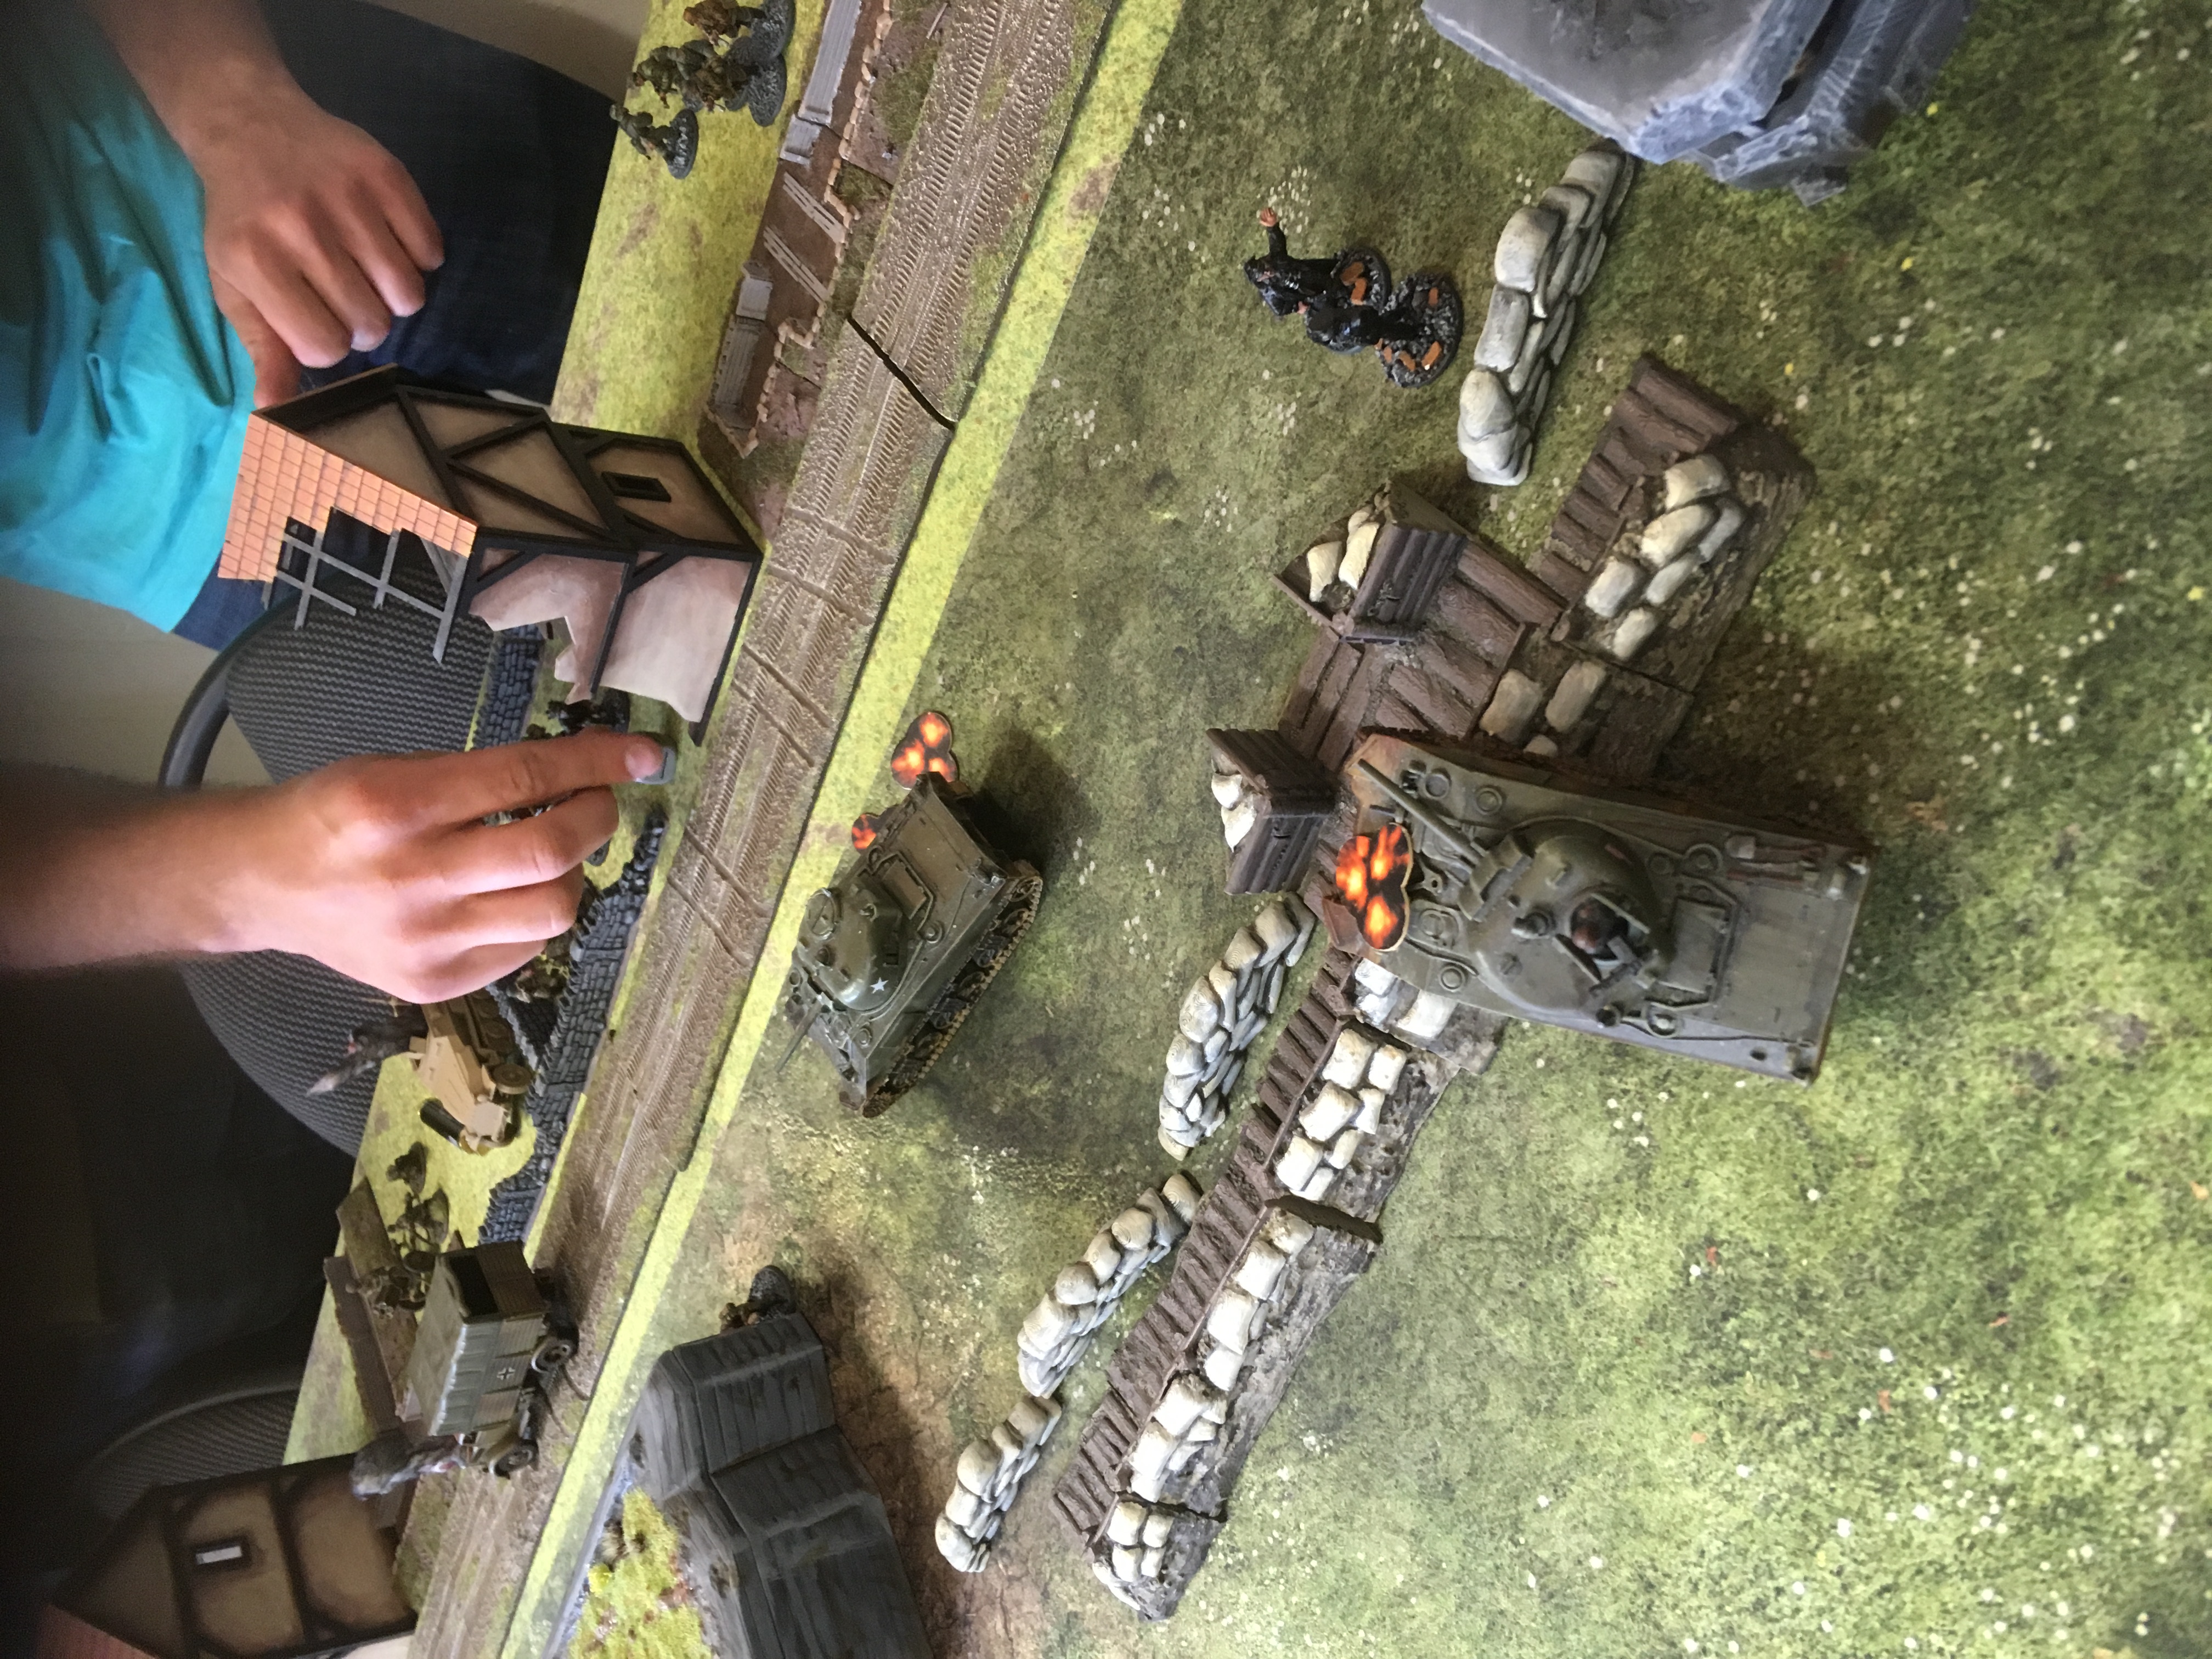 The drop boys versus 716th in a fierce infantry engagement